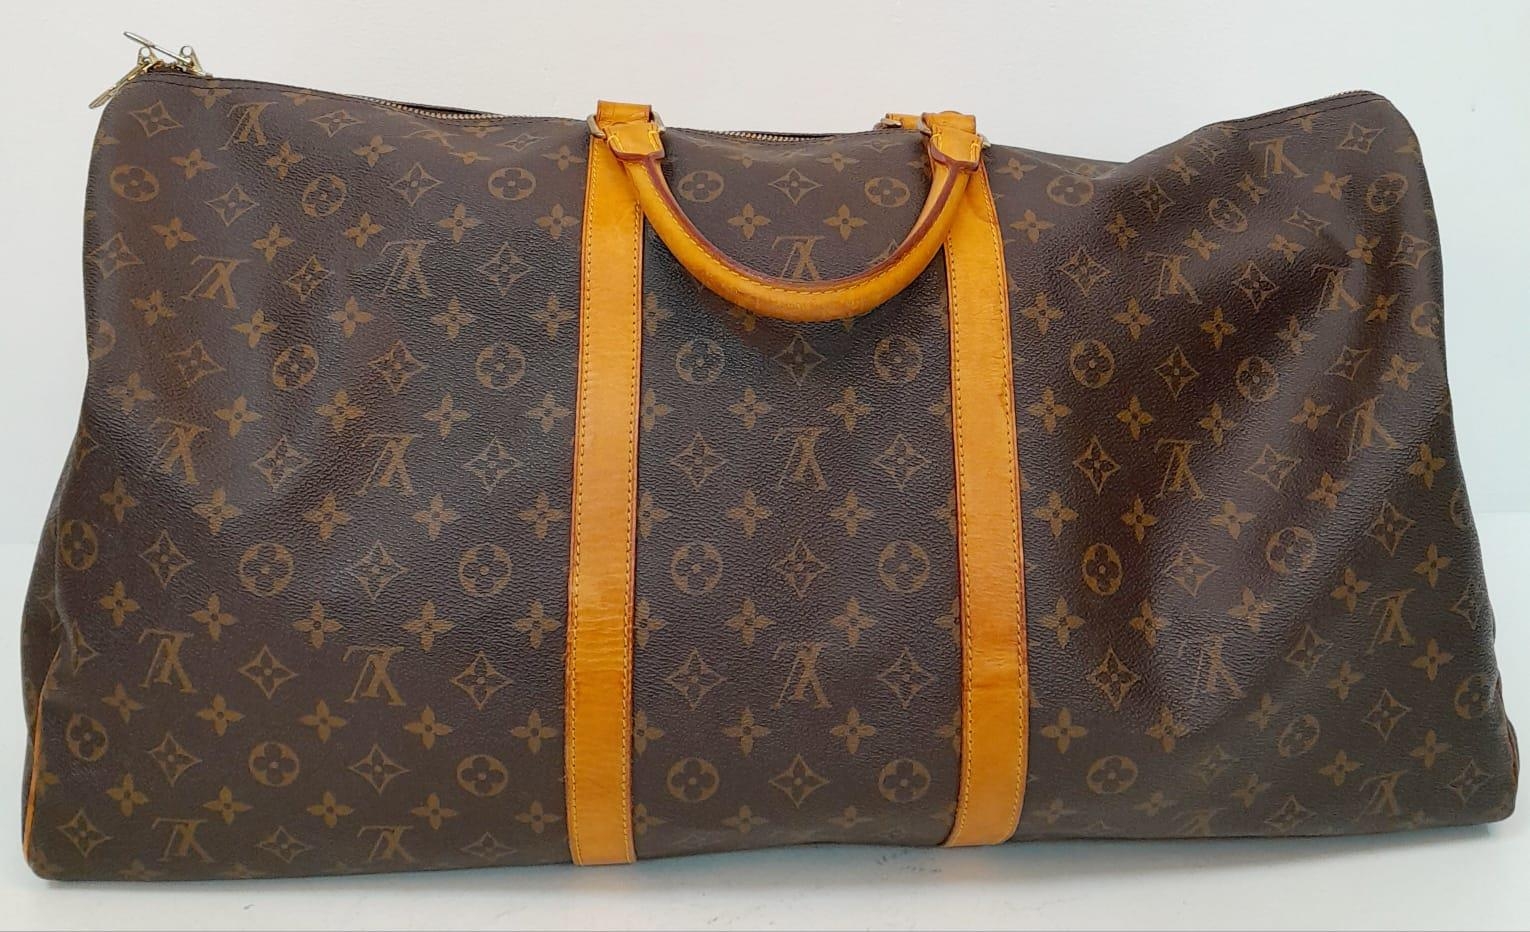 A Large Louis Vuitton Keepall Travel Bag. Monogram LV canvas exterior with cowhide leather handles - Image 2 of 8